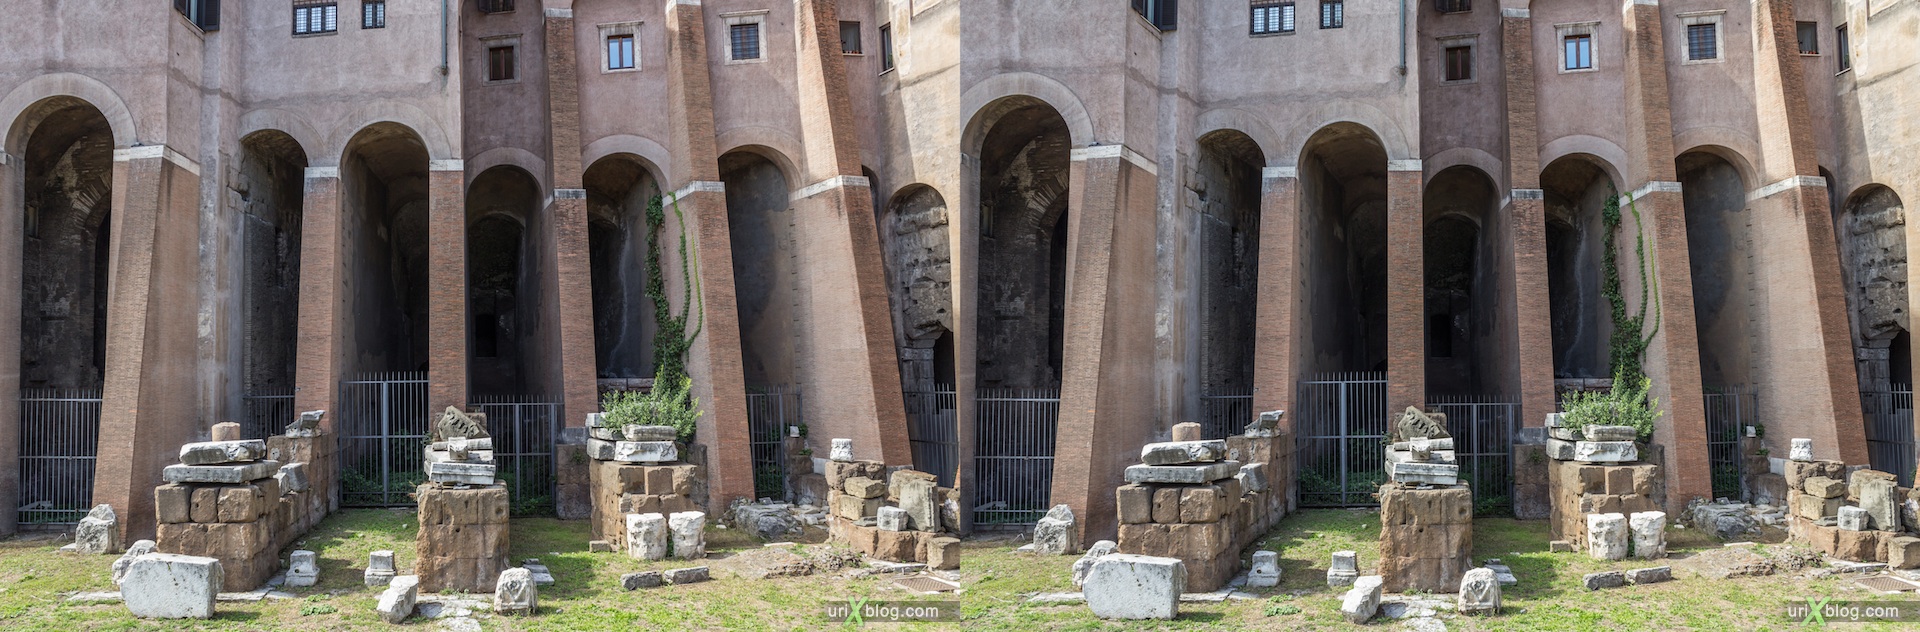 2012, Theater of Marcellus, Rome, Italy, 3D, stereo pair, cross-eyed, crossview, cross view stereo pair